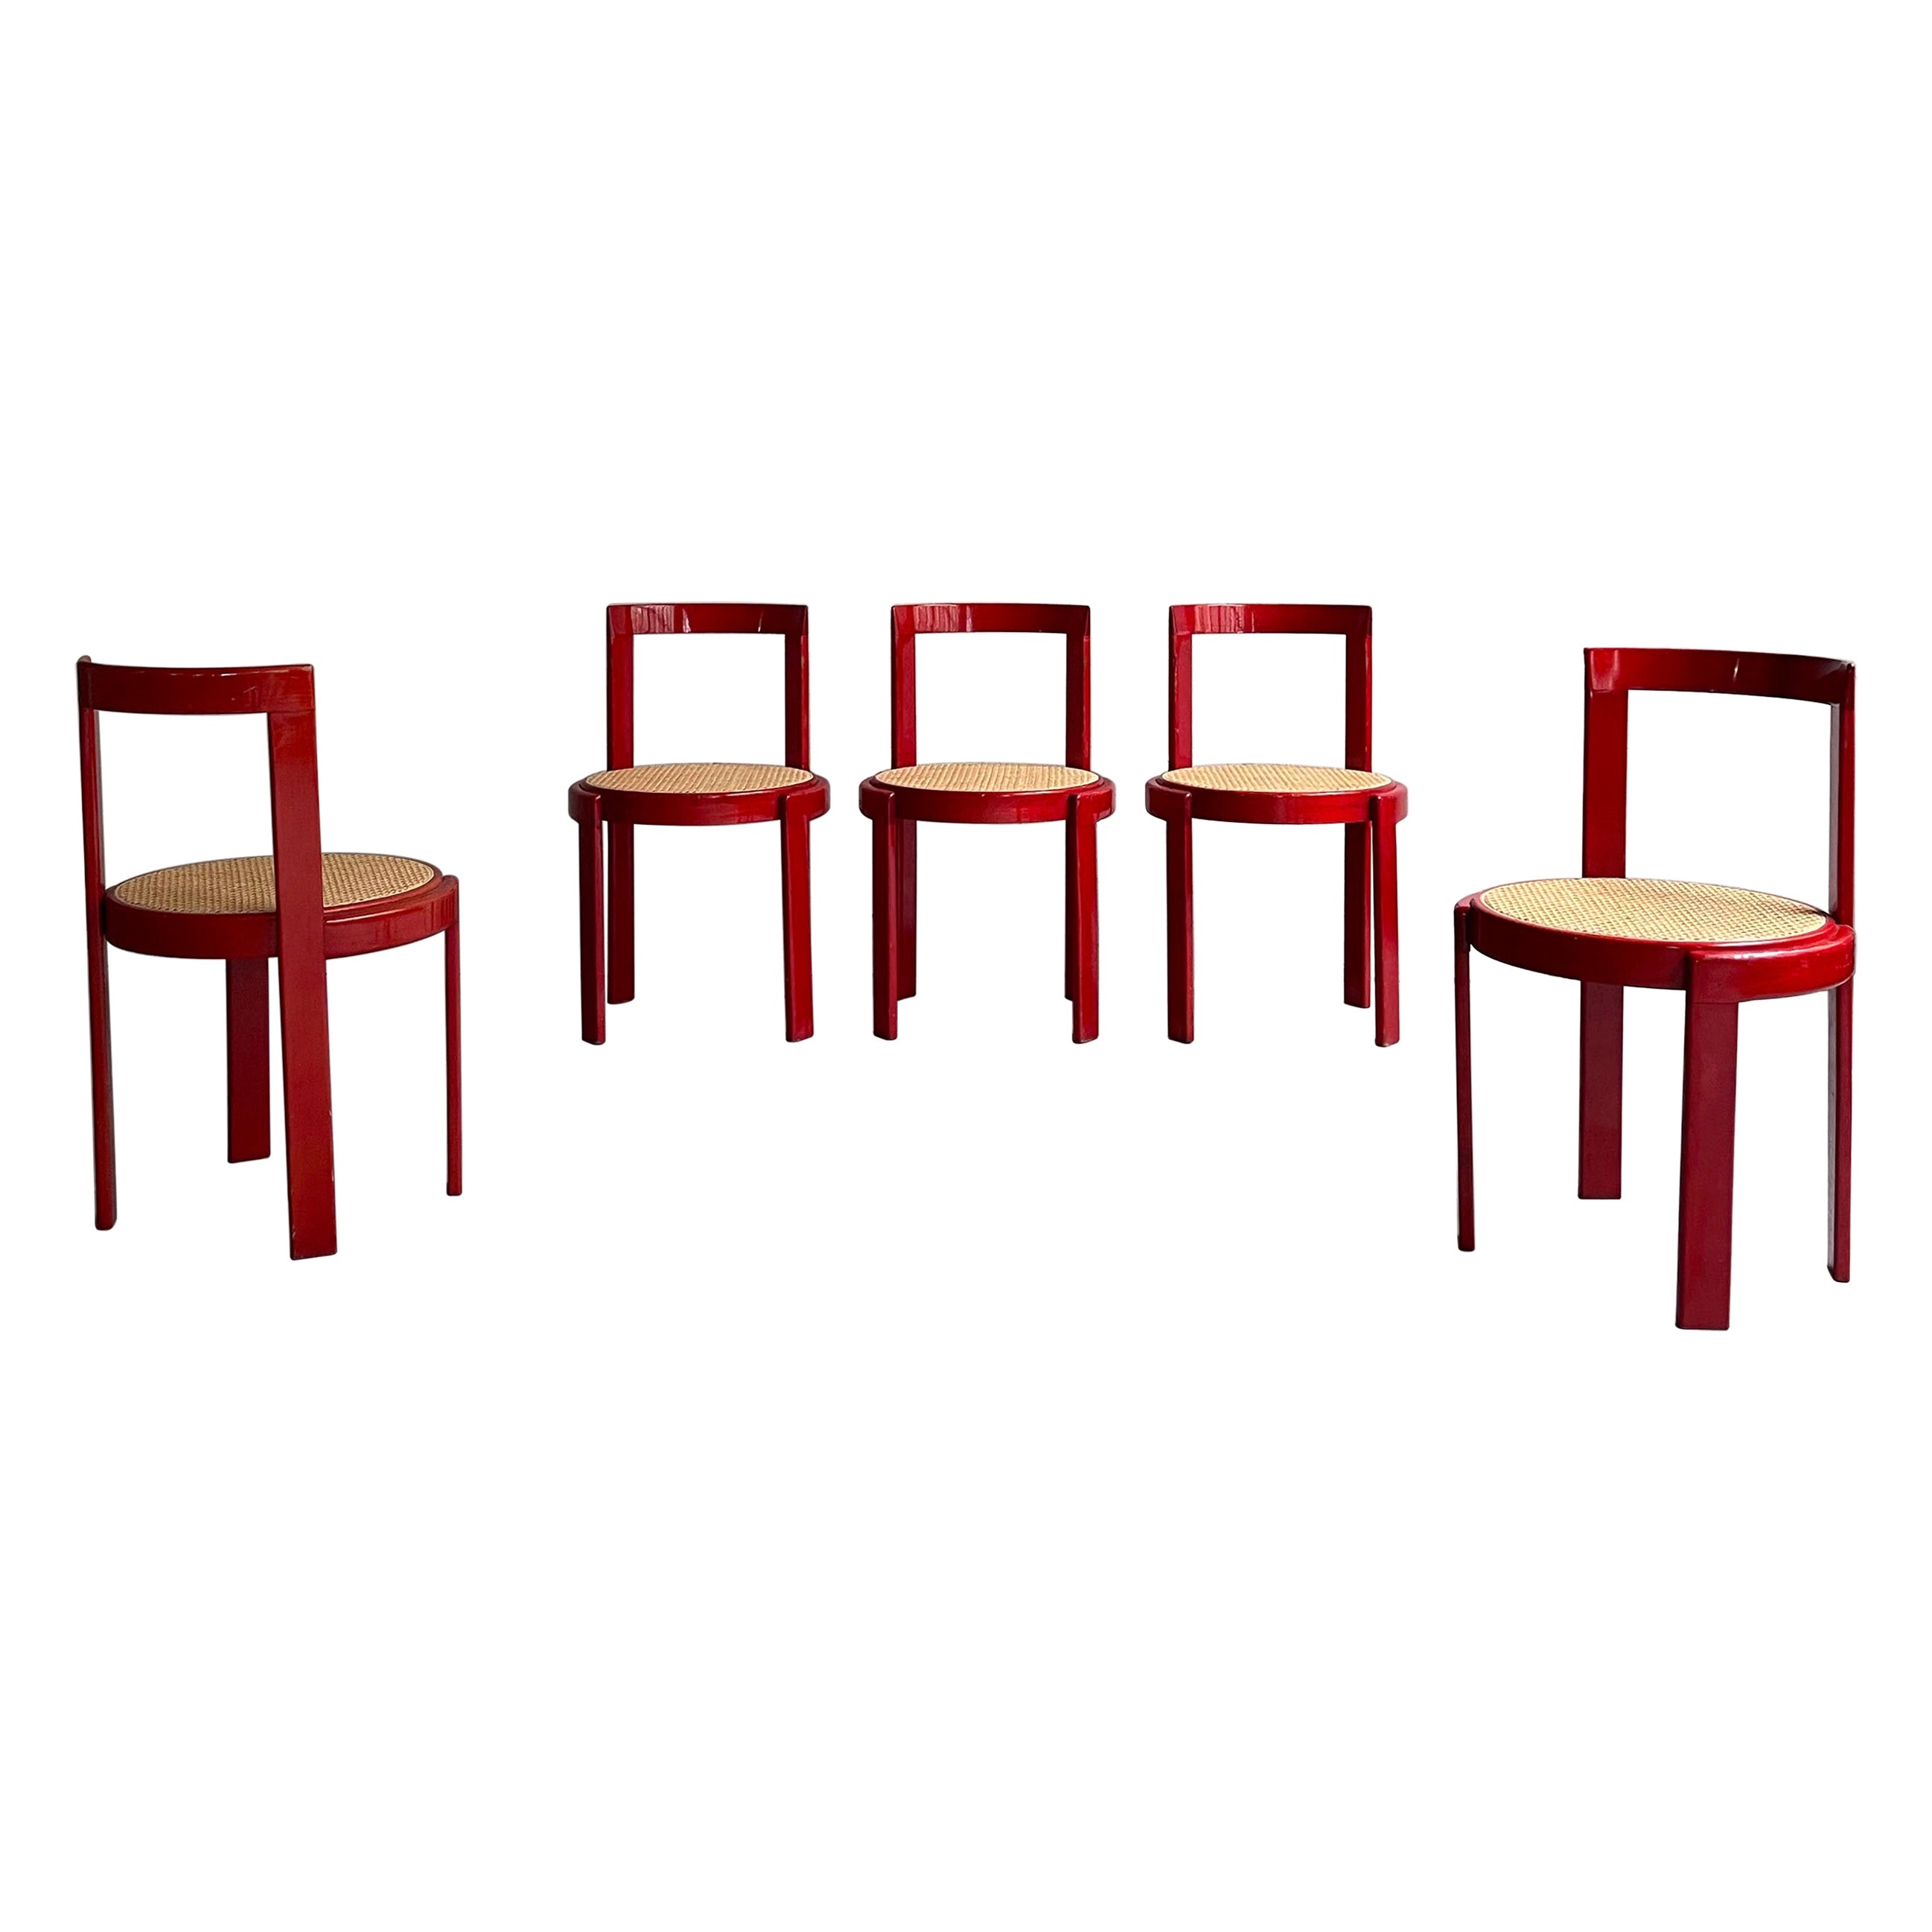 Italian Modernist Circular Bentwood And Cane Dining Chairs Set Of 6 For Sale